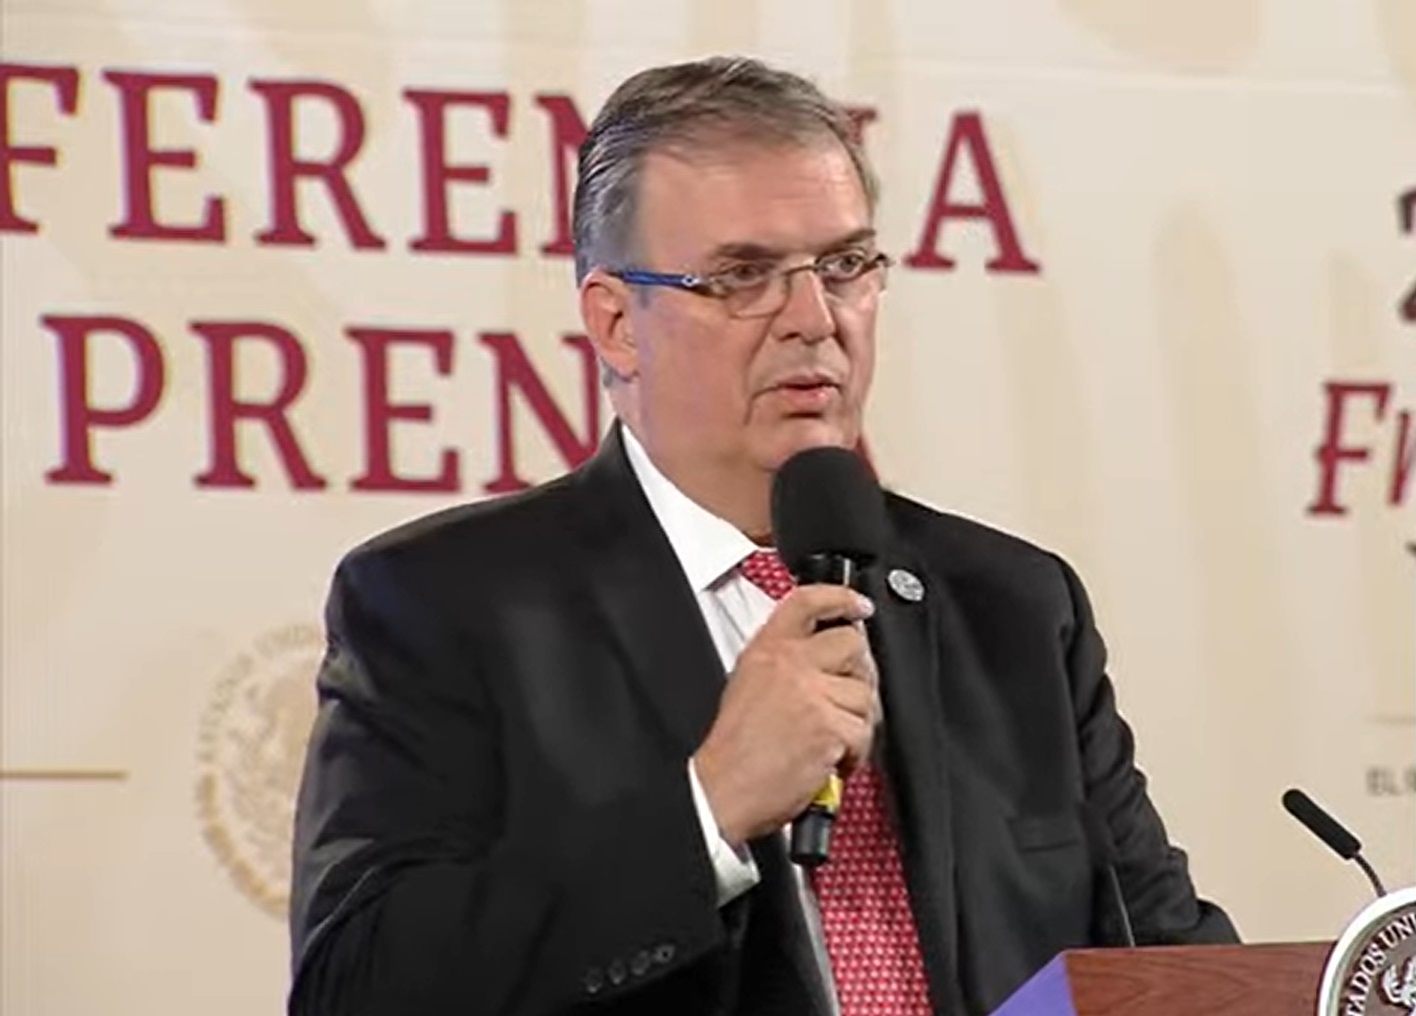 Foreign Minister Marcelo Ebrard responded to the remarks made by Senator Lindsey Graham